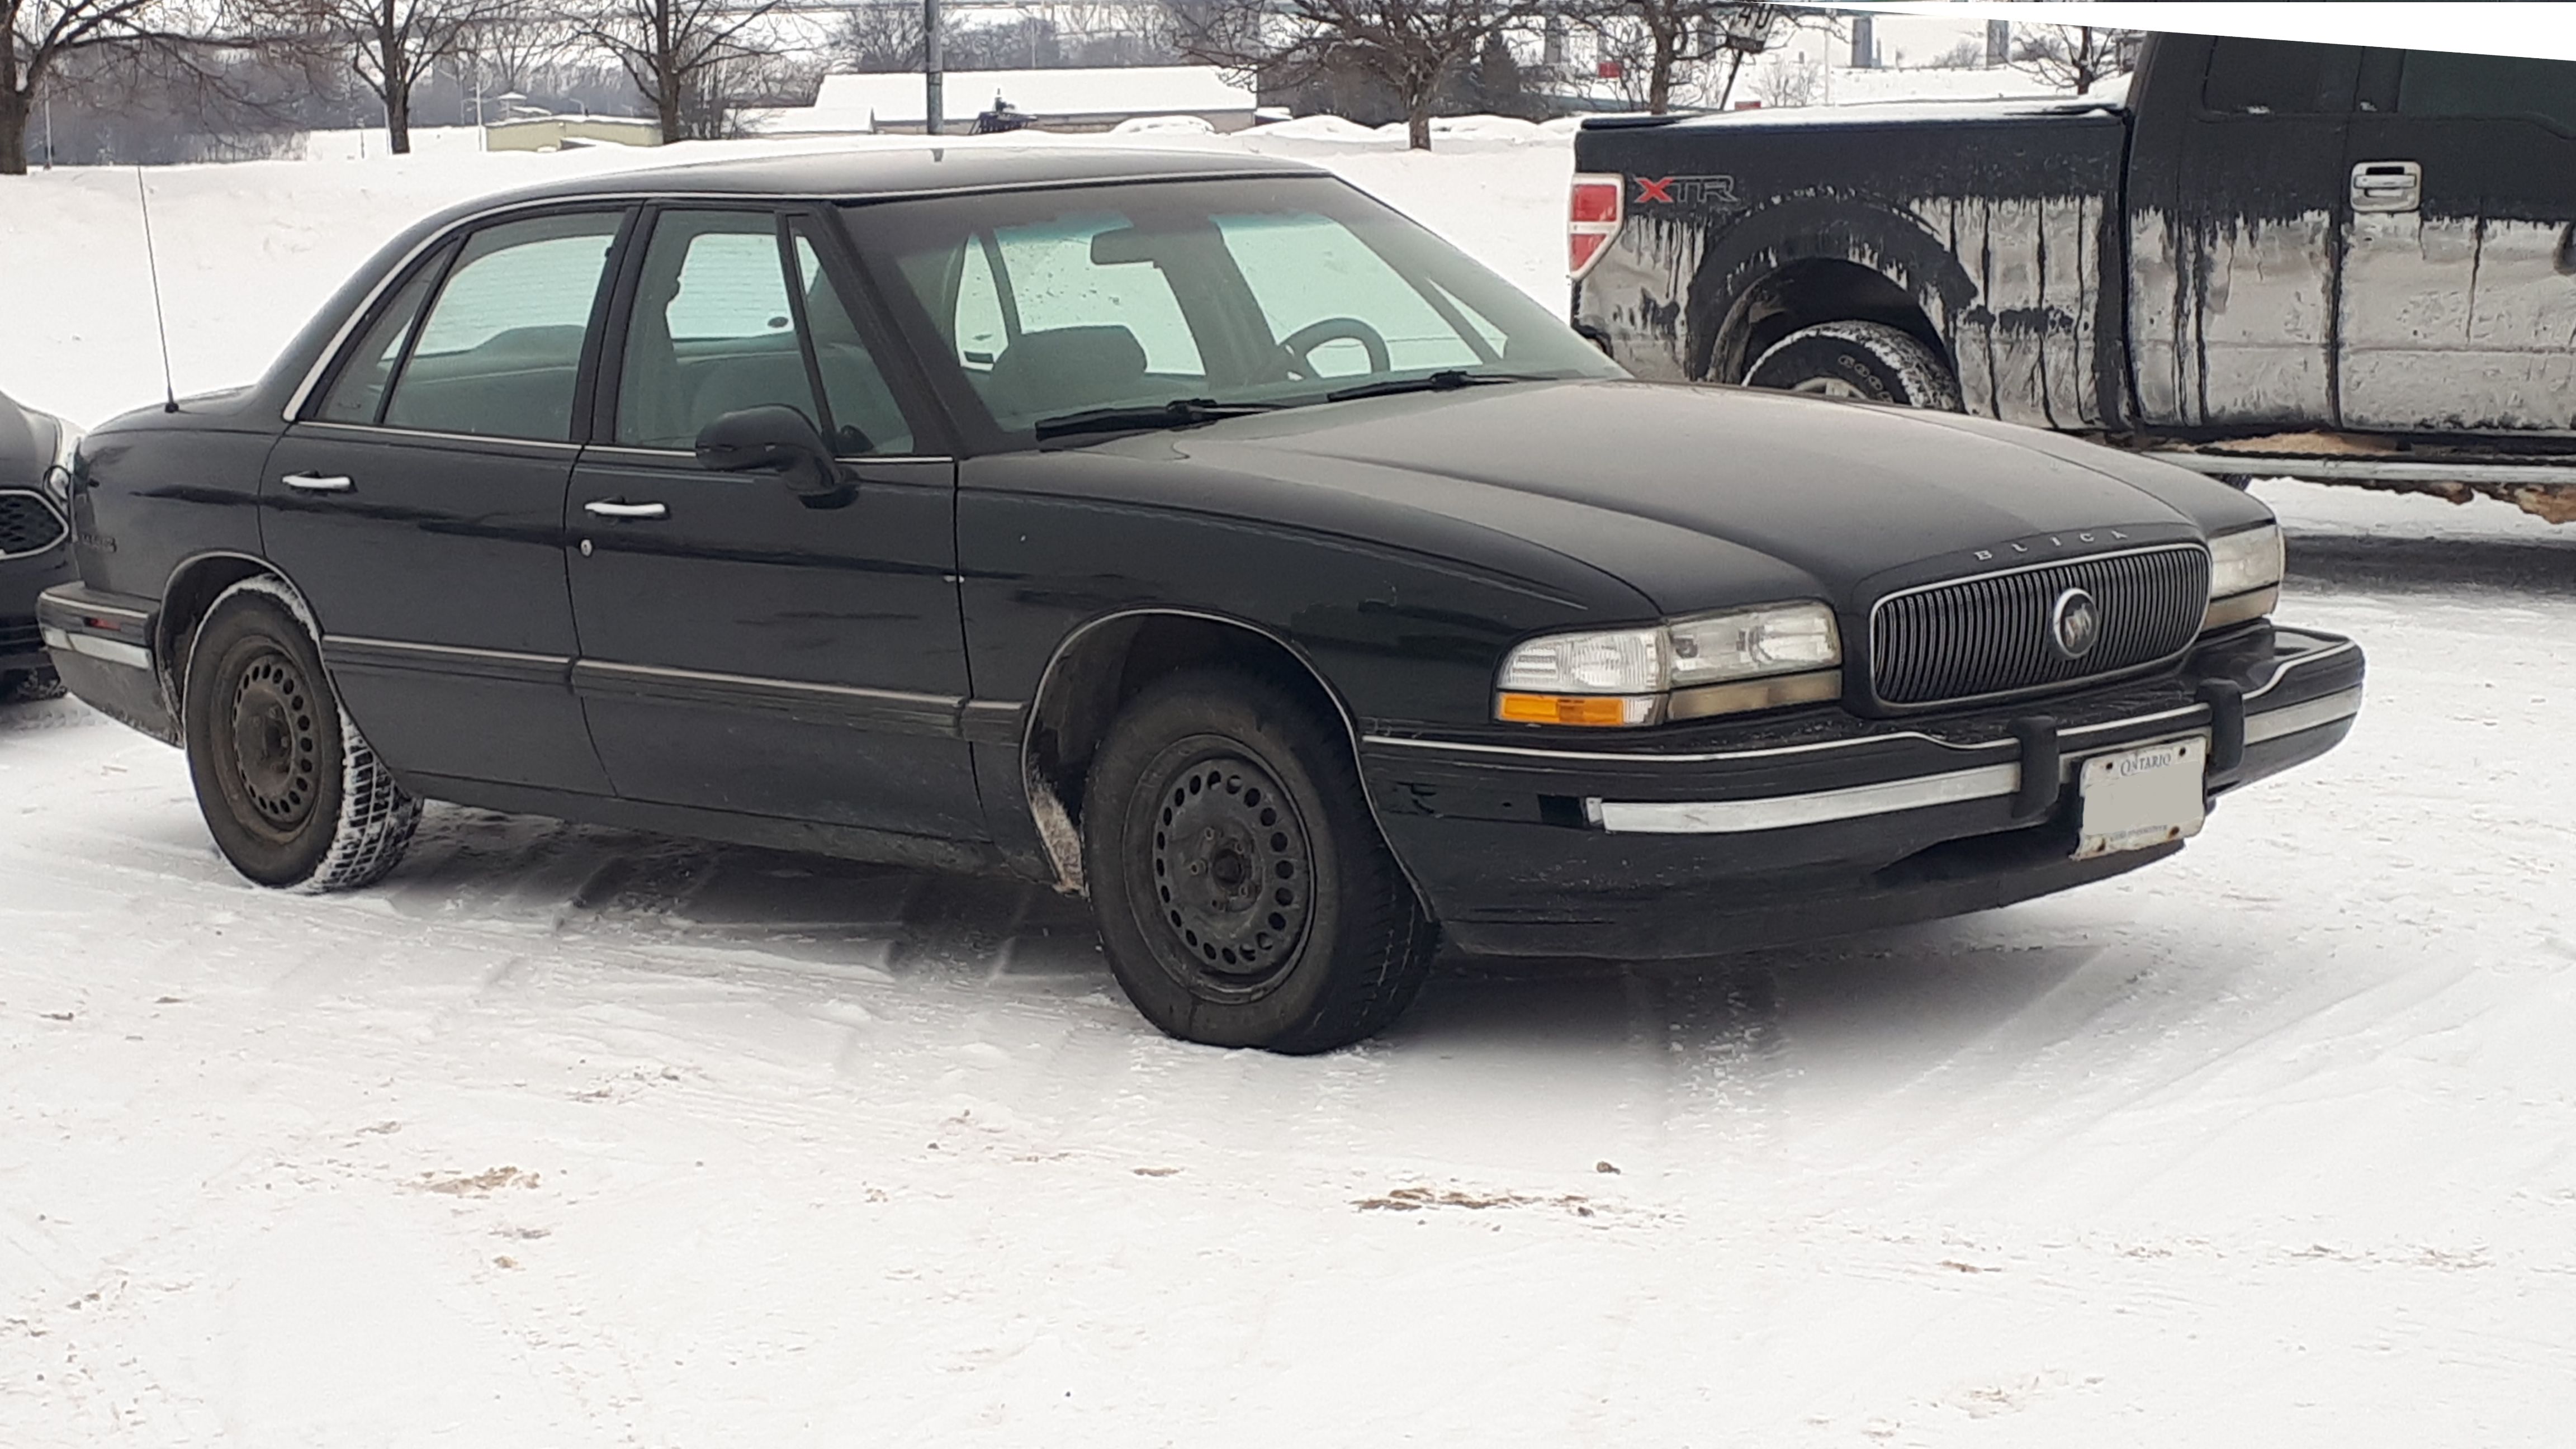 A Buick LeSabre in black.